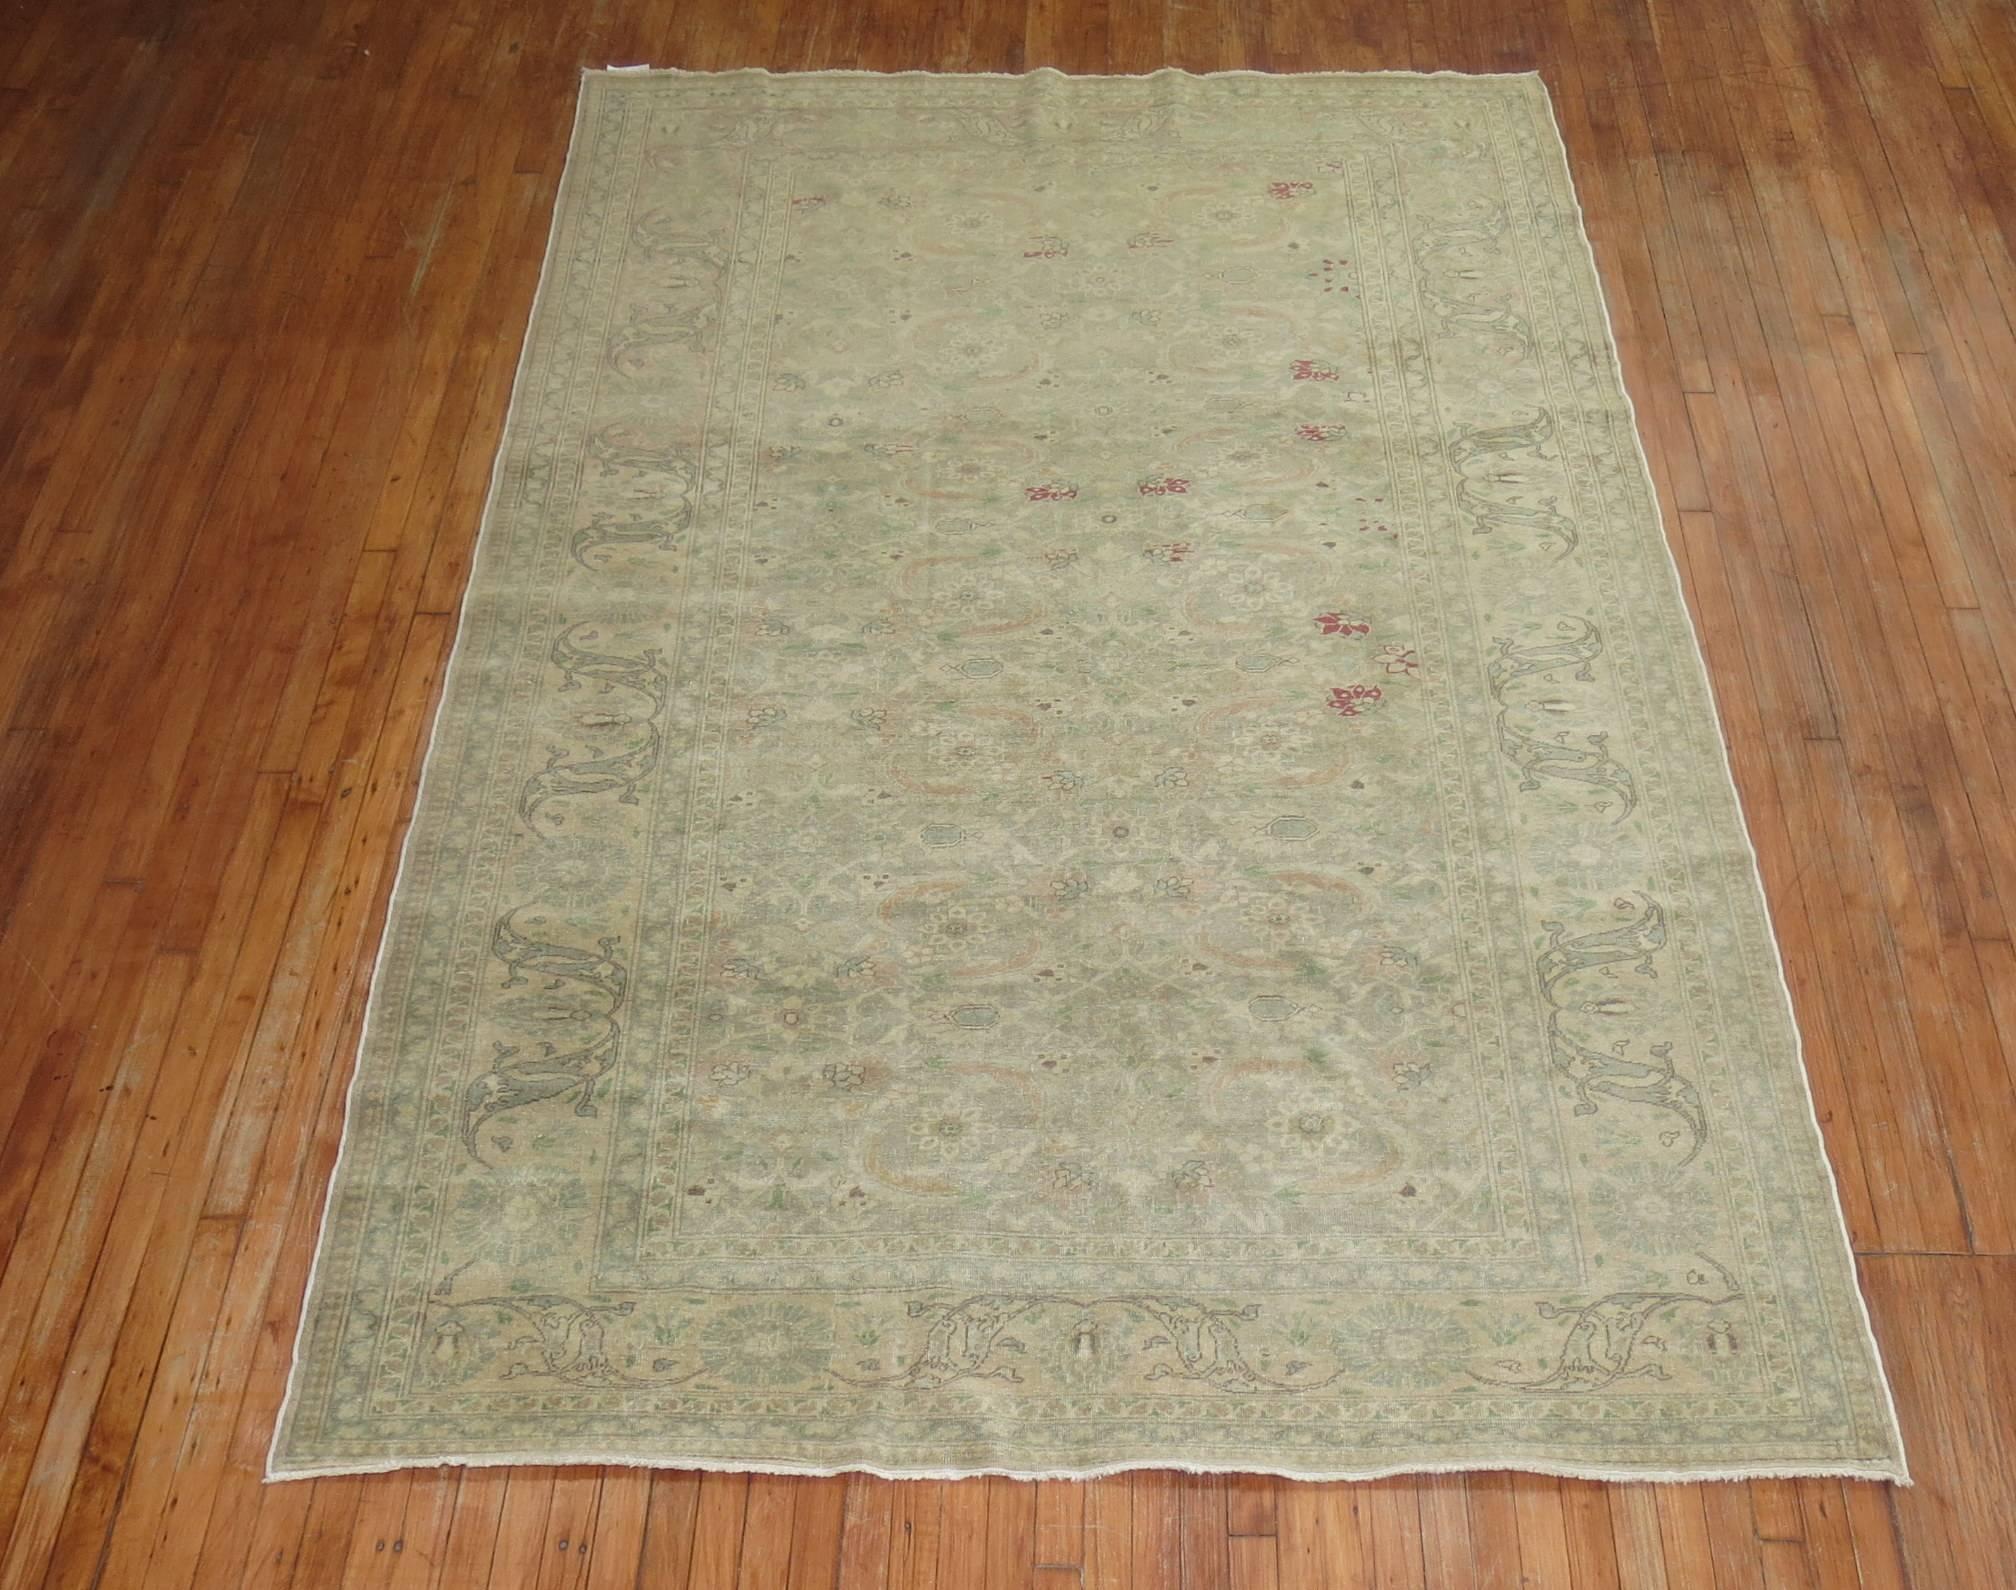 mid 20th century turkish rug in a predominant green tone

6'7'' x 9'10''

Decorative antique carpets from Sivas in the southeast are finely woven and formal, tending to interpret the classical Persian style with central medallions and all-over